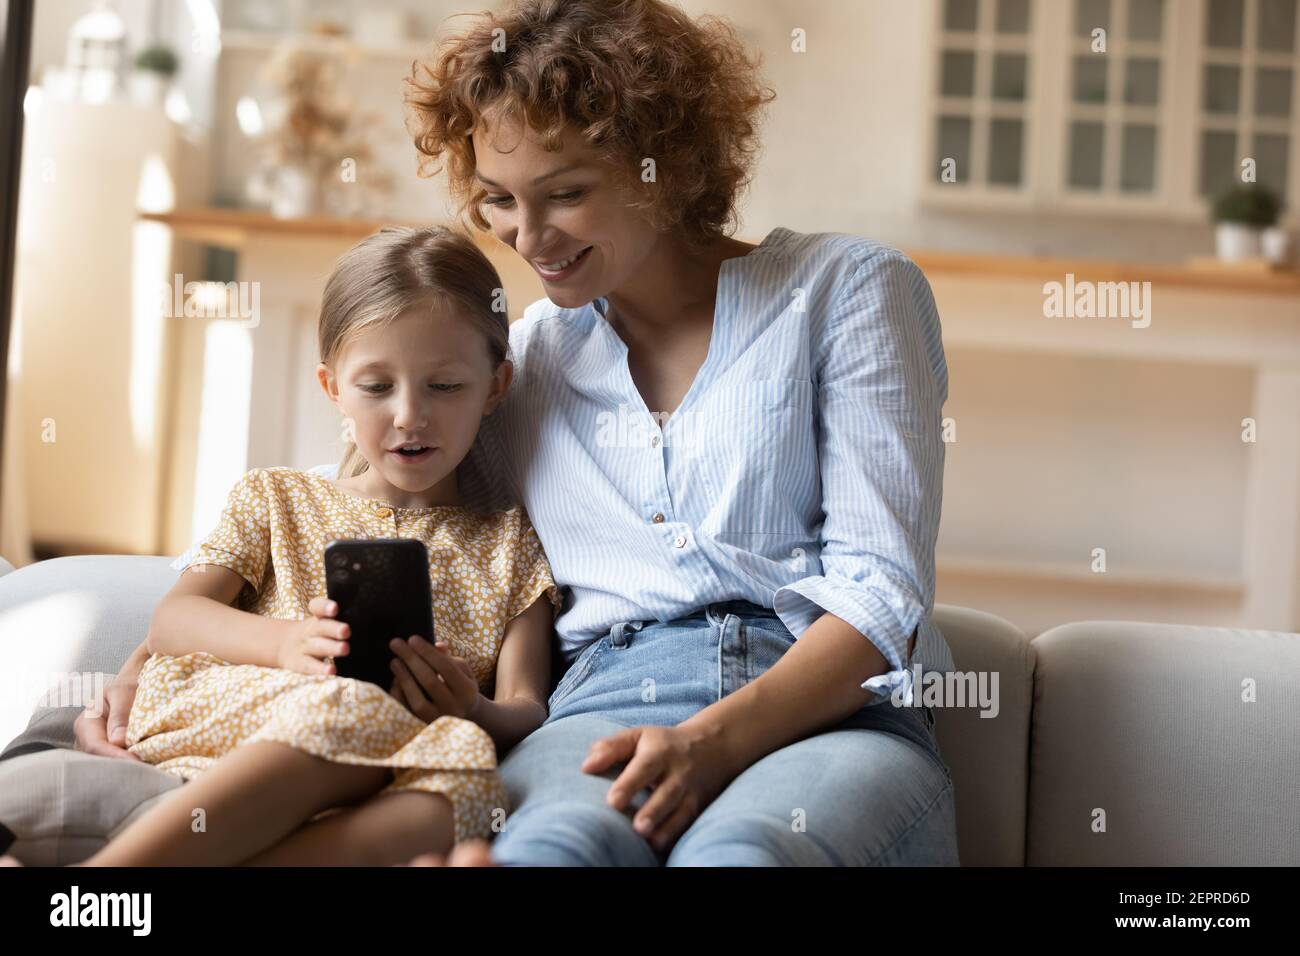 Adopted child enjoy spending time with foster mom using phone Stock Photo